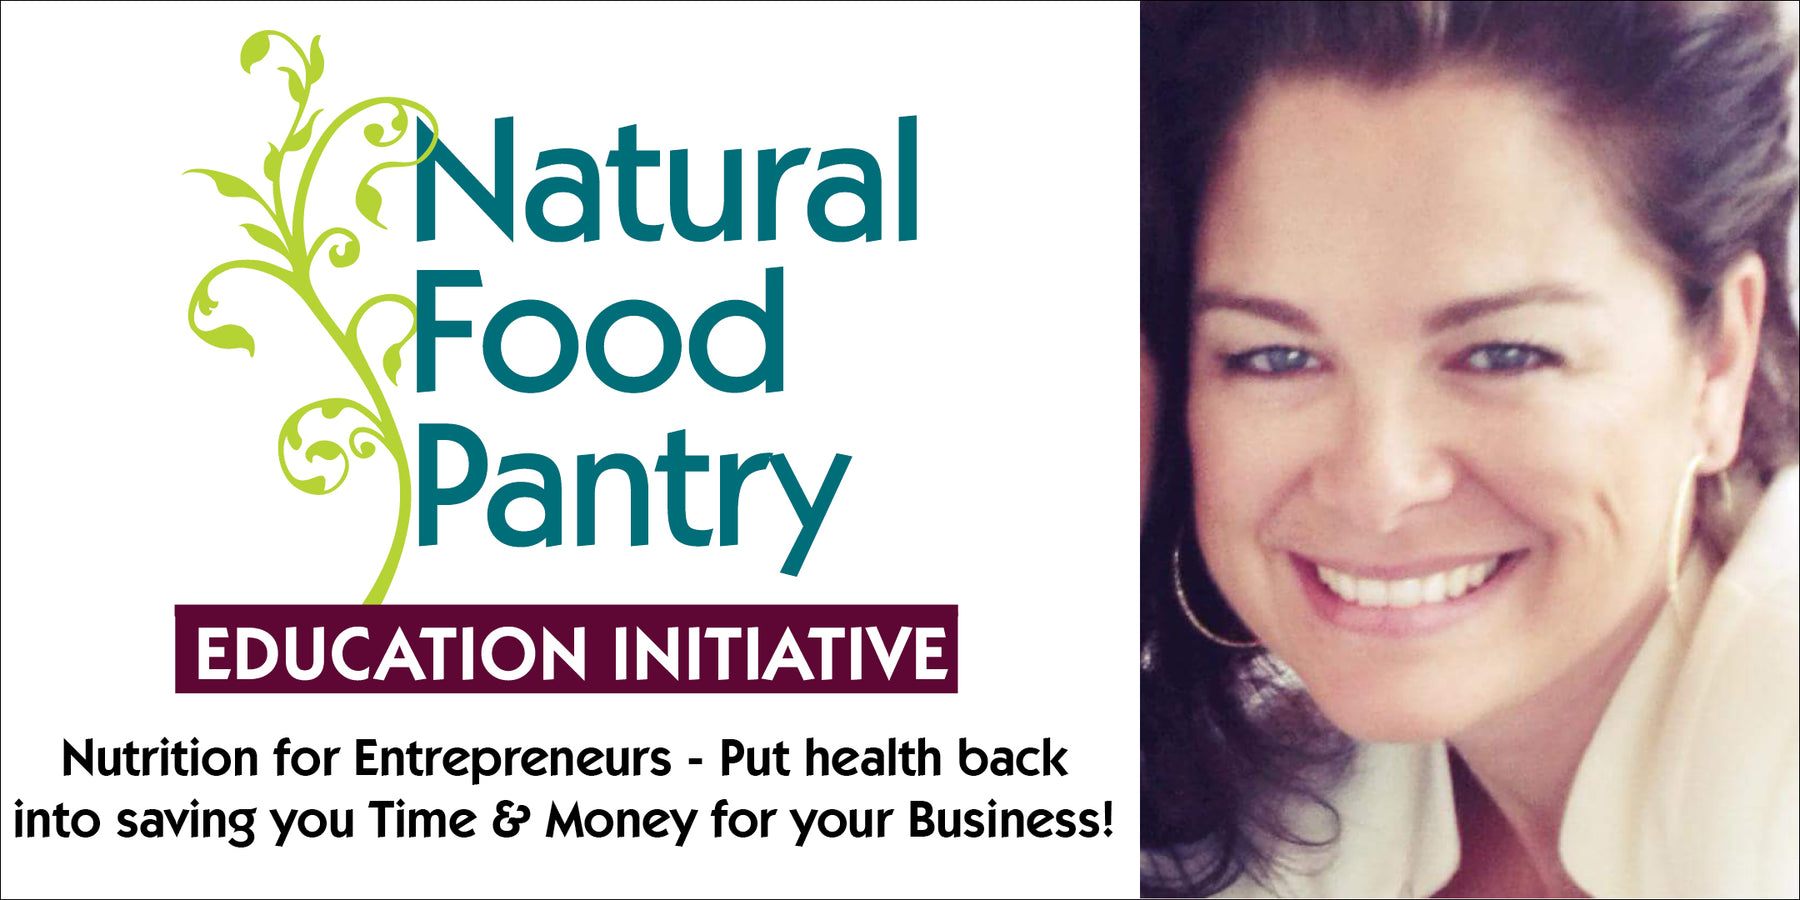 Jun 5: Nutrition for Entrepreneurs - A Networking Event that puts health back into saving you Time and Money for your Business!